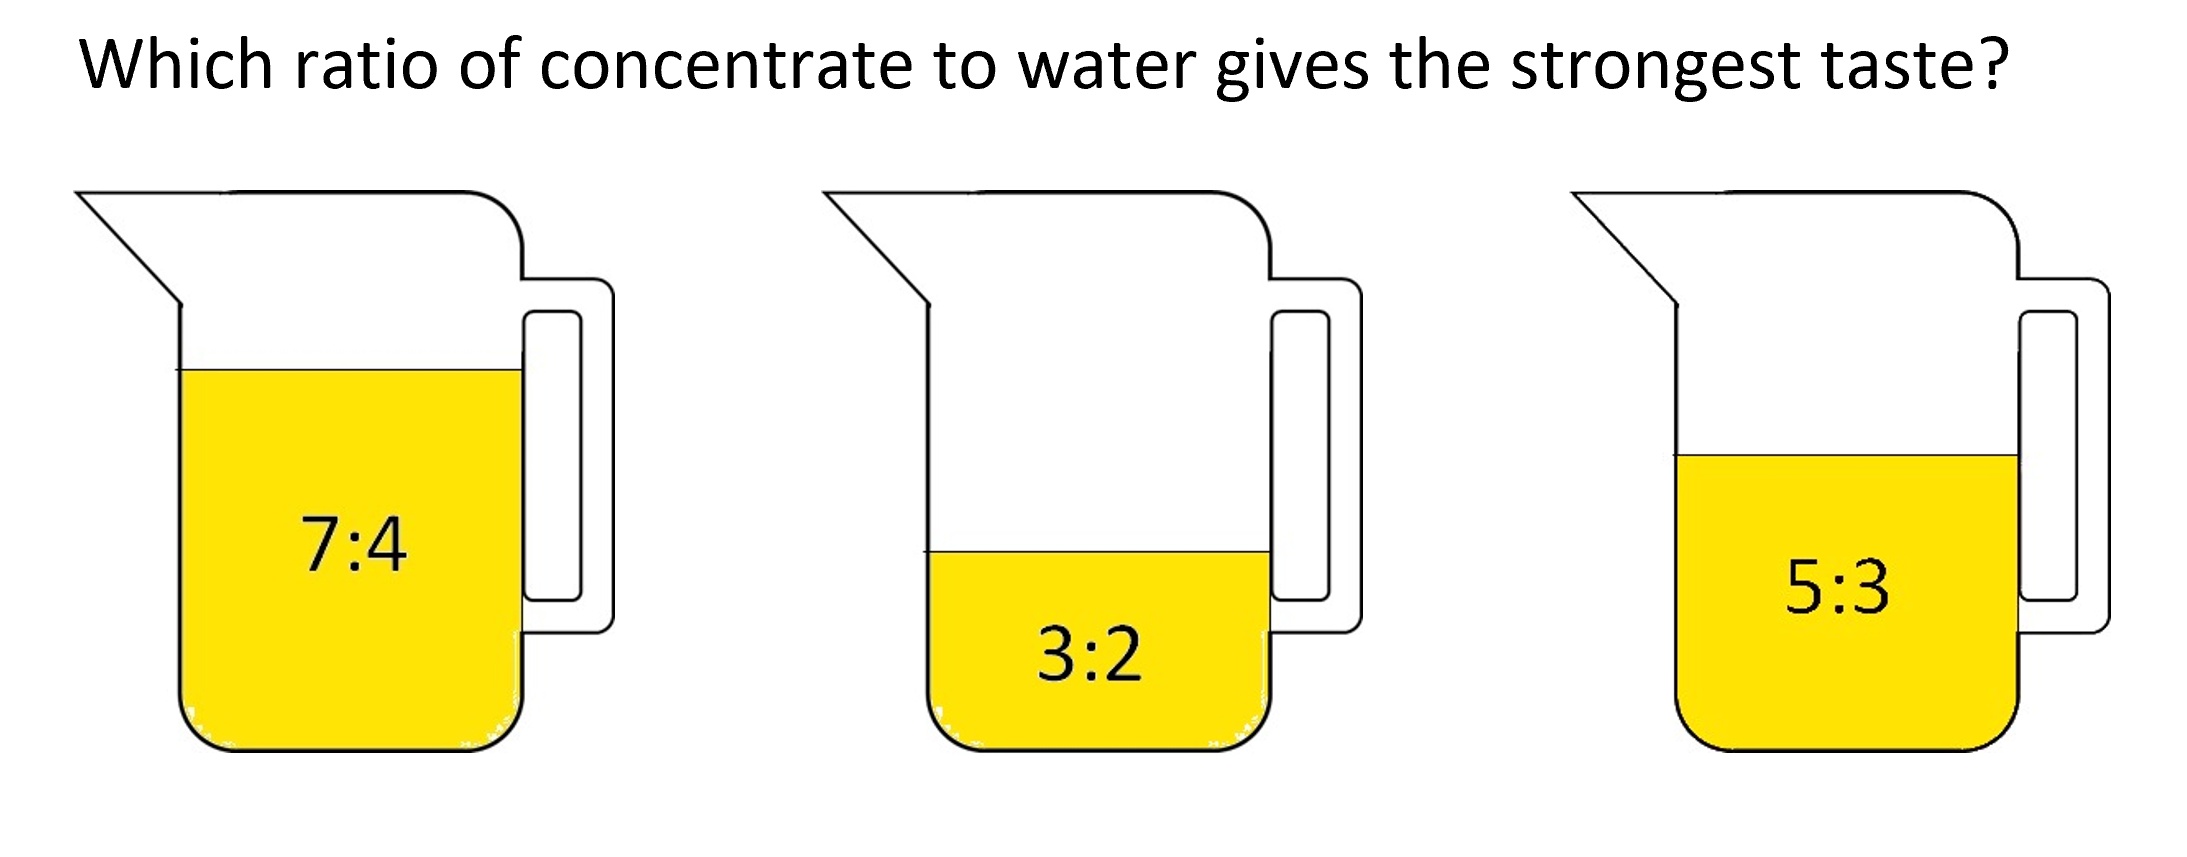 Image of three jus with ratios labelled (7:4, 3:2, 5:3). Text saying "Which ratio of concentrate to water gives the strongest taste?"